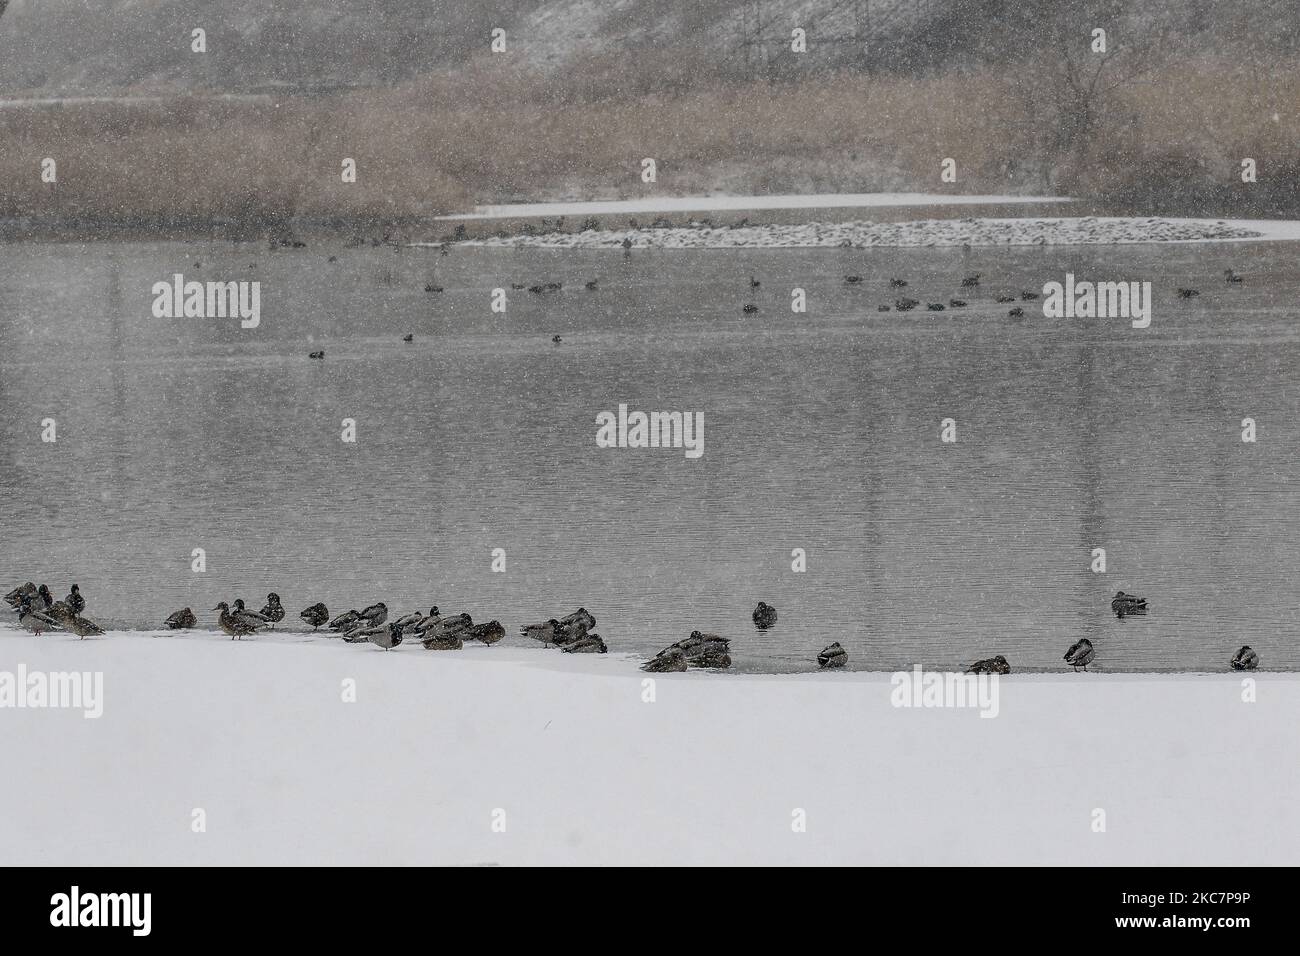 A flock of spotbill ducks swims on waters off stream, a famous wintering site for migratory birds on the Mungyeong, South Korea. South Korea's agricultural ministry said Monday it has completed destroying 18.8 million poultry to prevent the spread of highly pathogenic bird flu among local farms, with the number set to further rise down the road on the piling up of new cases. The country has confirmed 66 cases of the malign H5N8 strain of avian influenza since late November, including the latest case from a duck farm in Gimje, about 260 kilometers southwest of Seoul, the previous day, according Stock Photo